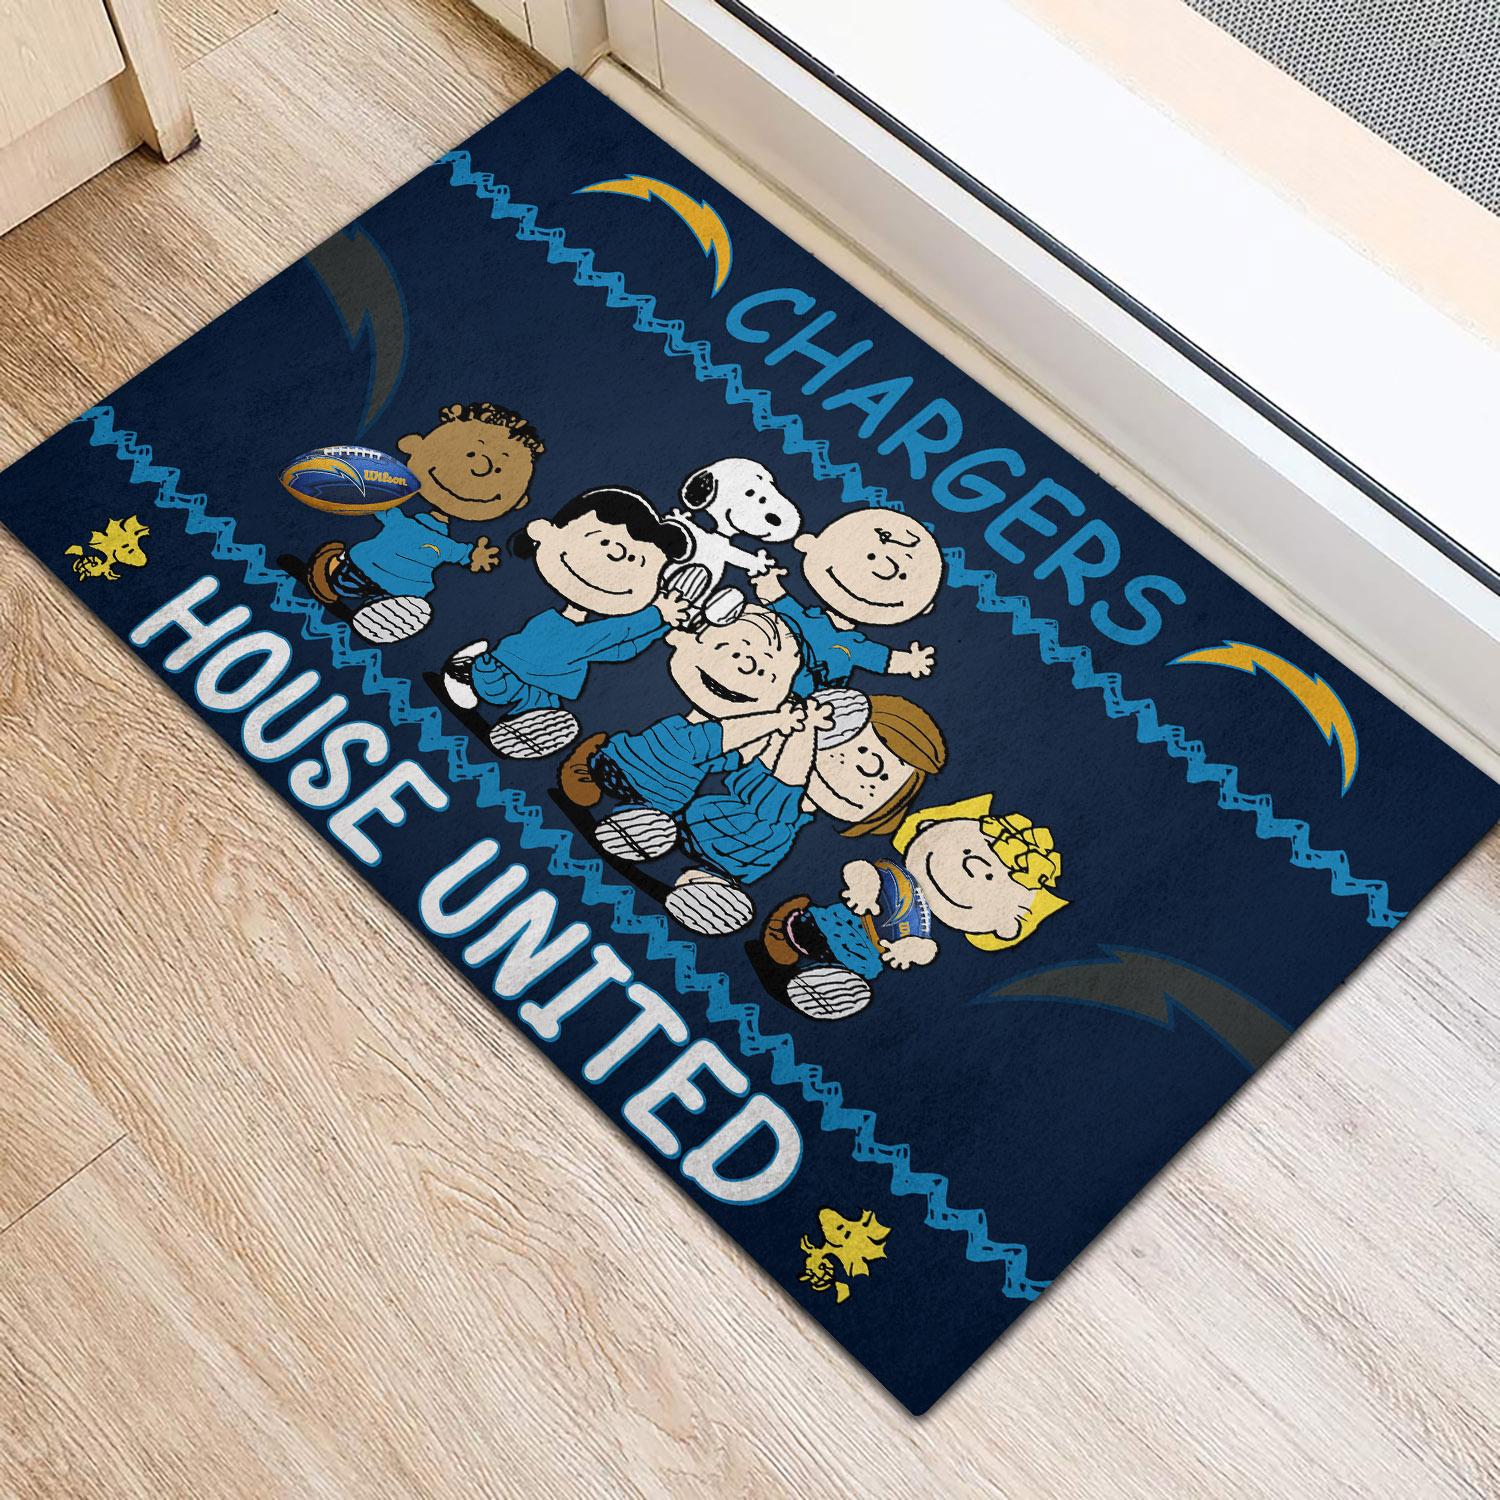 Los Angeles Chargers Peanuts House United Doormat